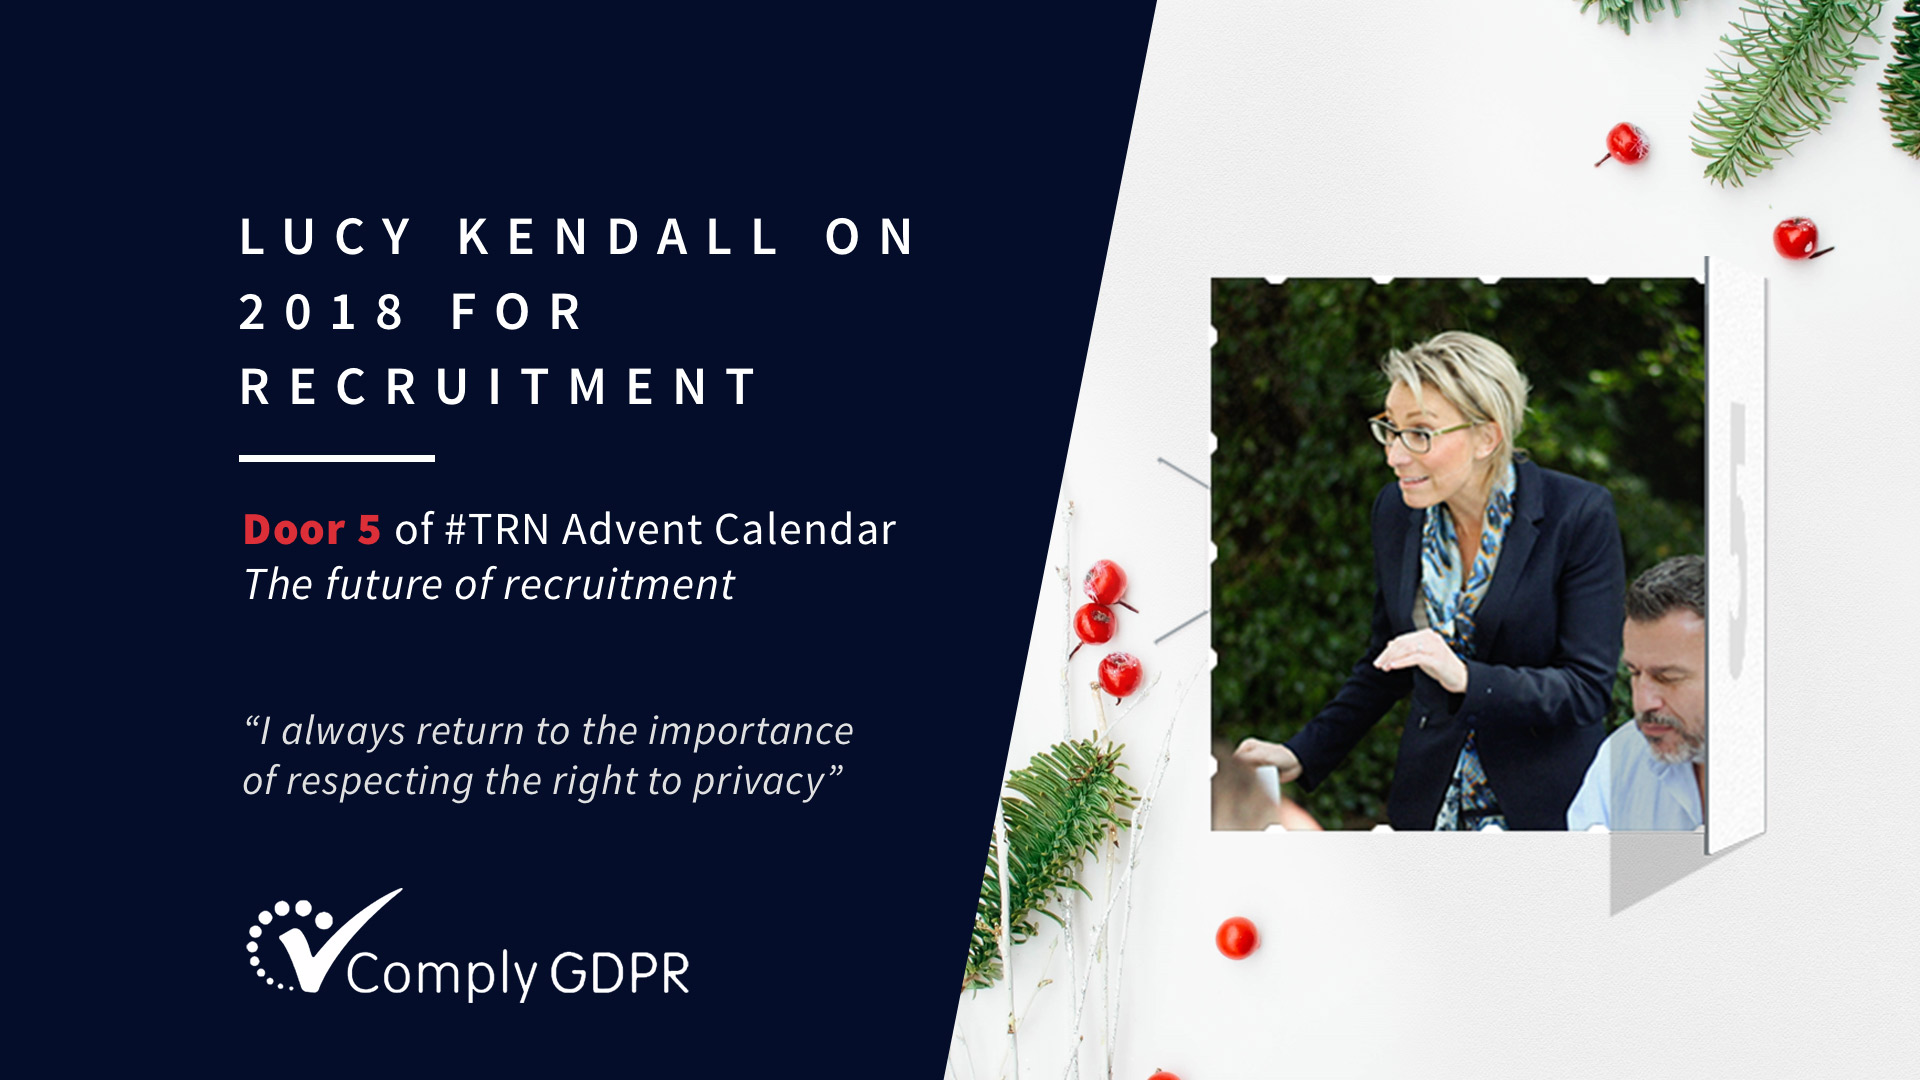 Lucy Kendall on 2018 for Recruitment